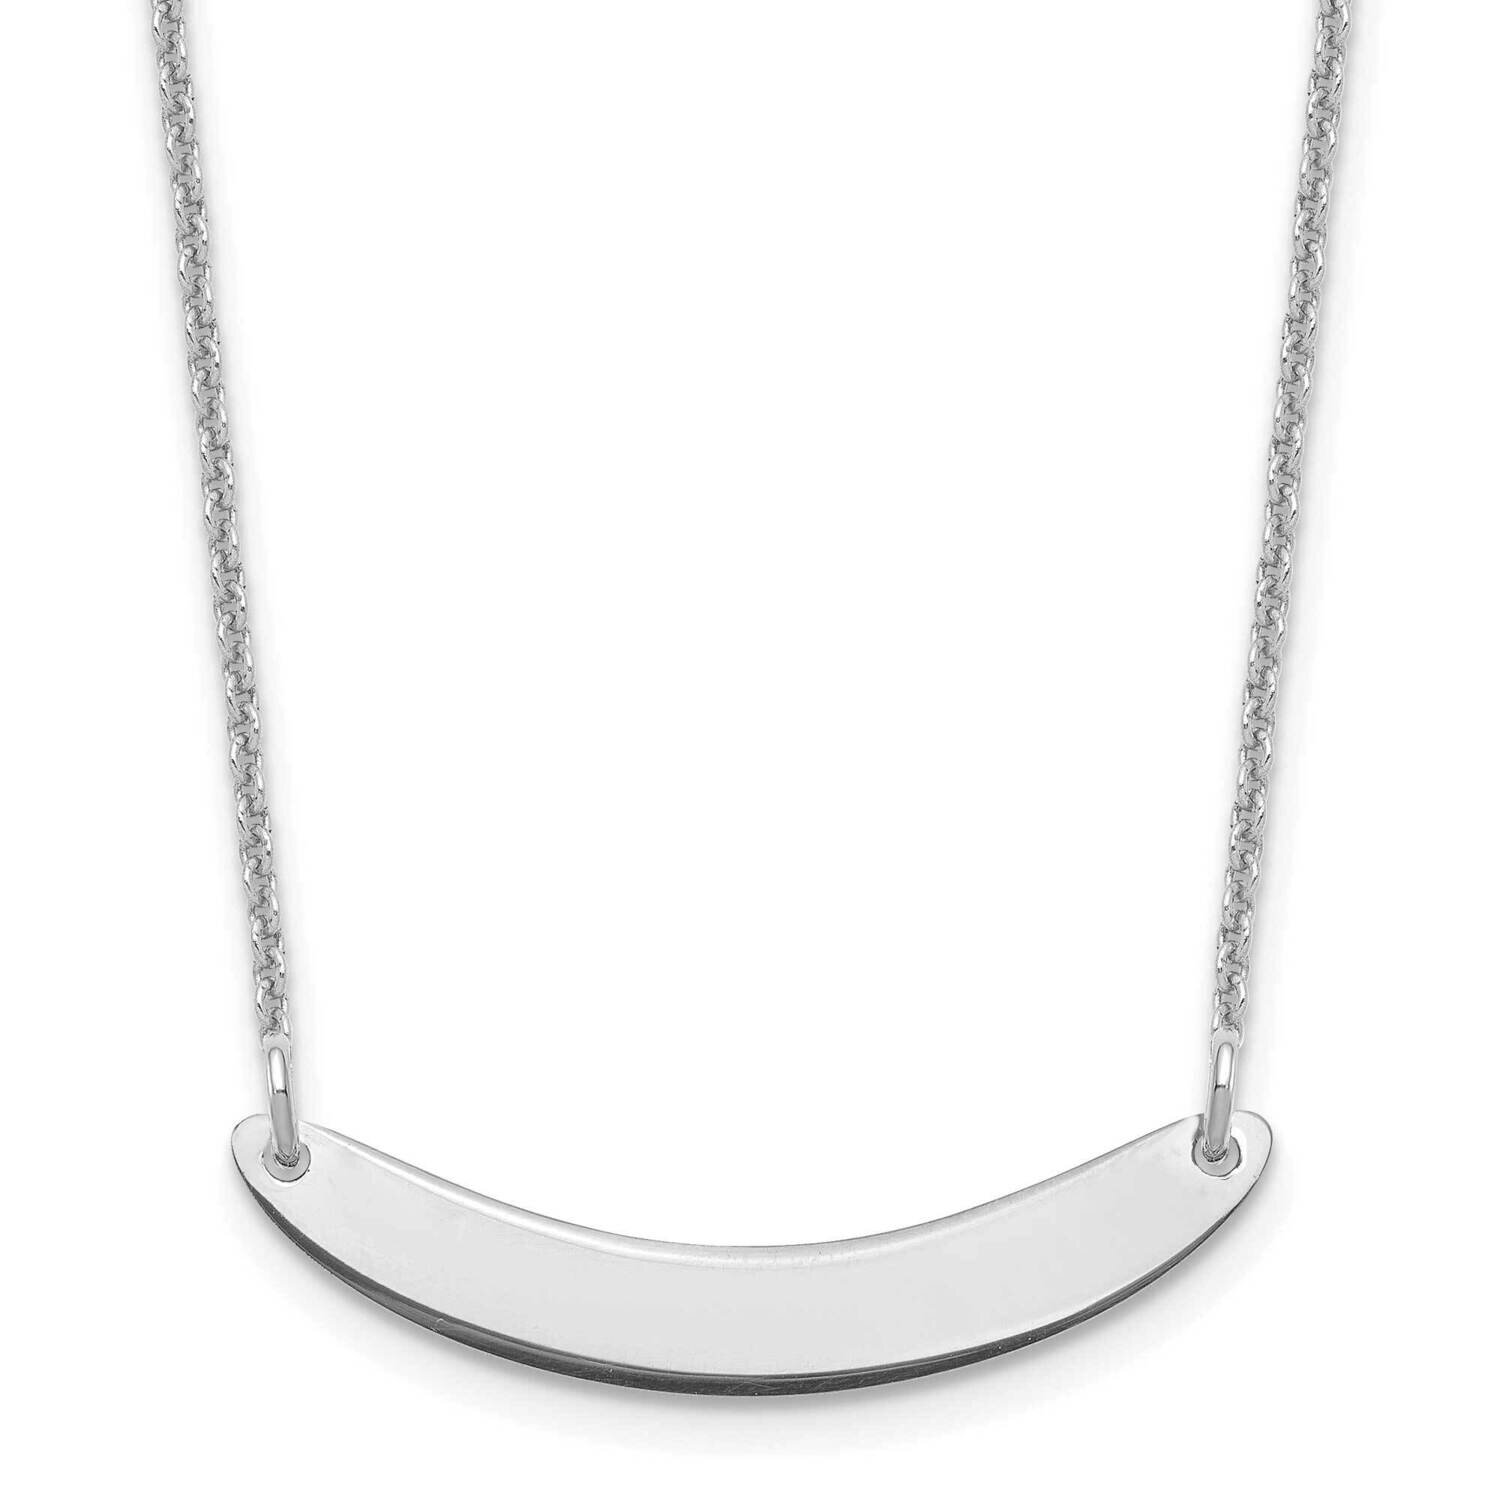 Polished Curved Blank Bar Necklace 14k White Gold Small XNA1201W